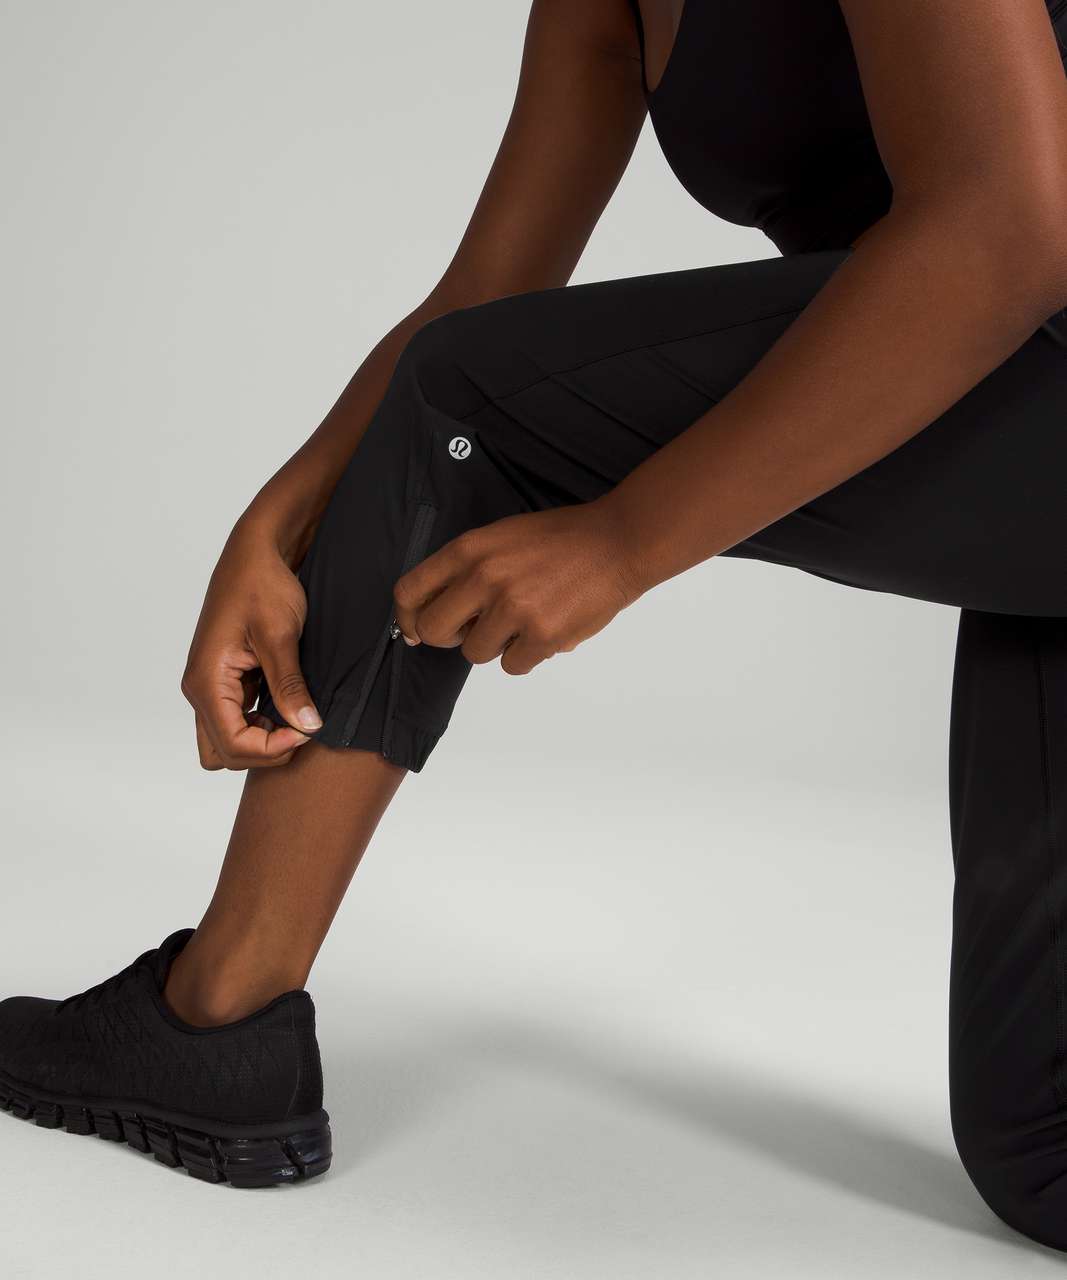 Lululemon Adapted State High-Rise Jogger Crop - Black